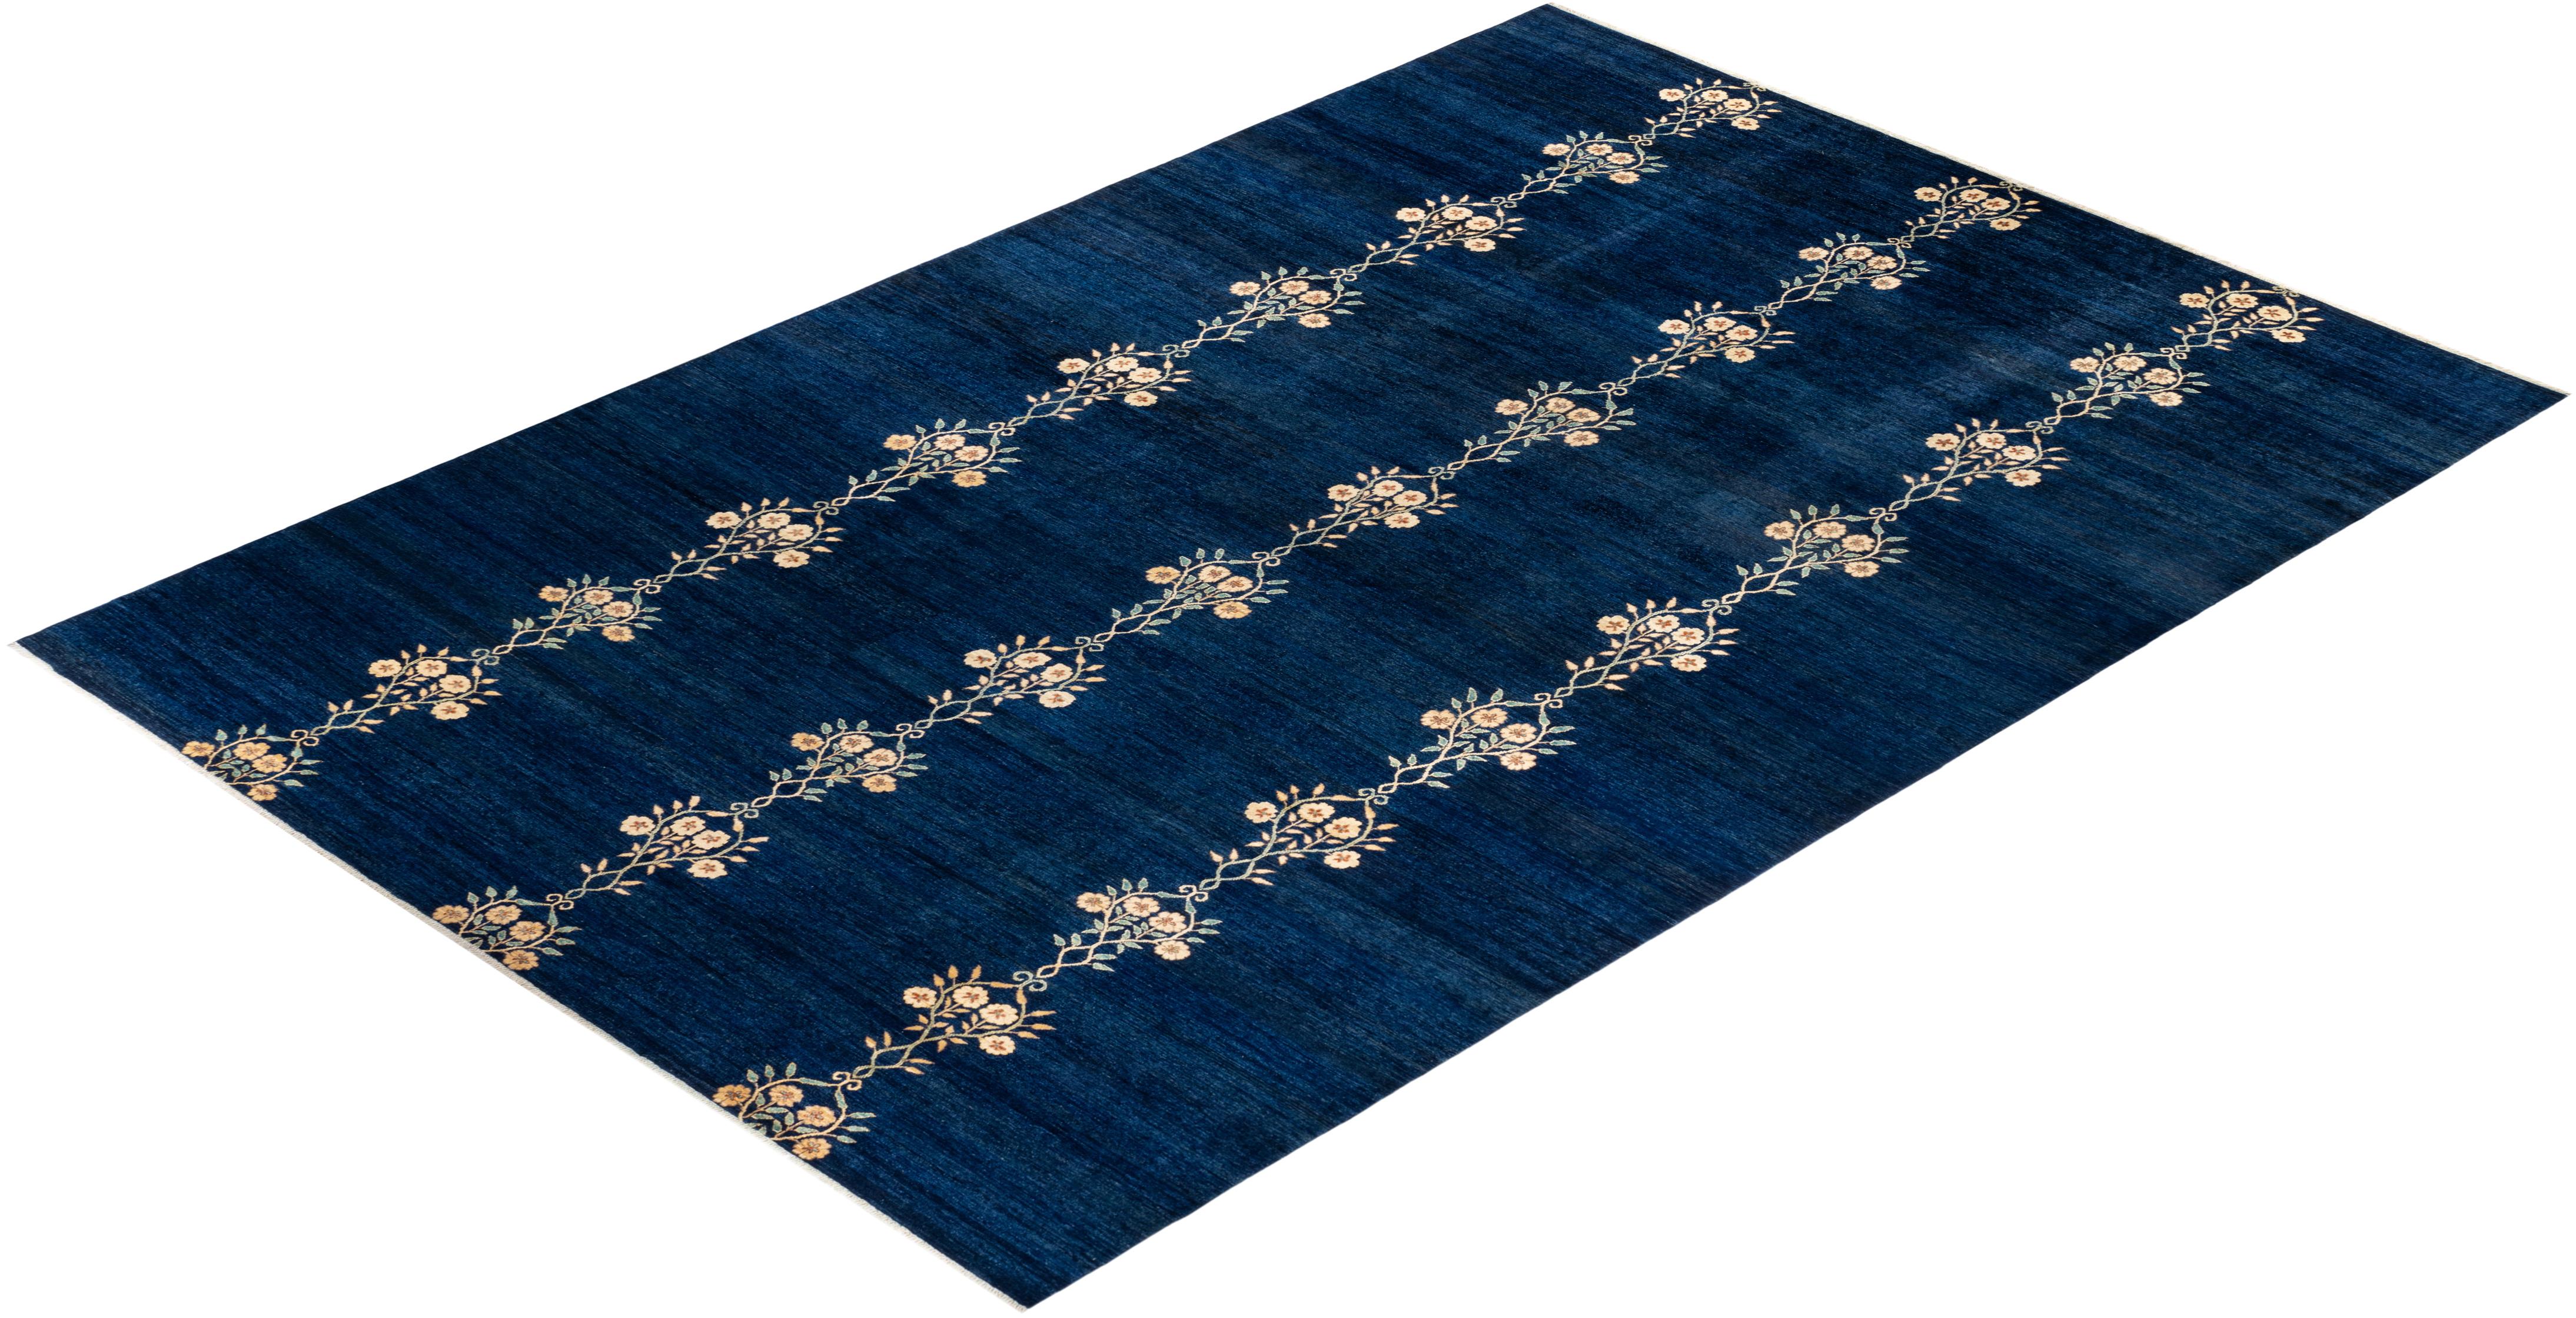 Contemporary Eclectic Handknotted Wool Blue Area Rug im Angebot 2